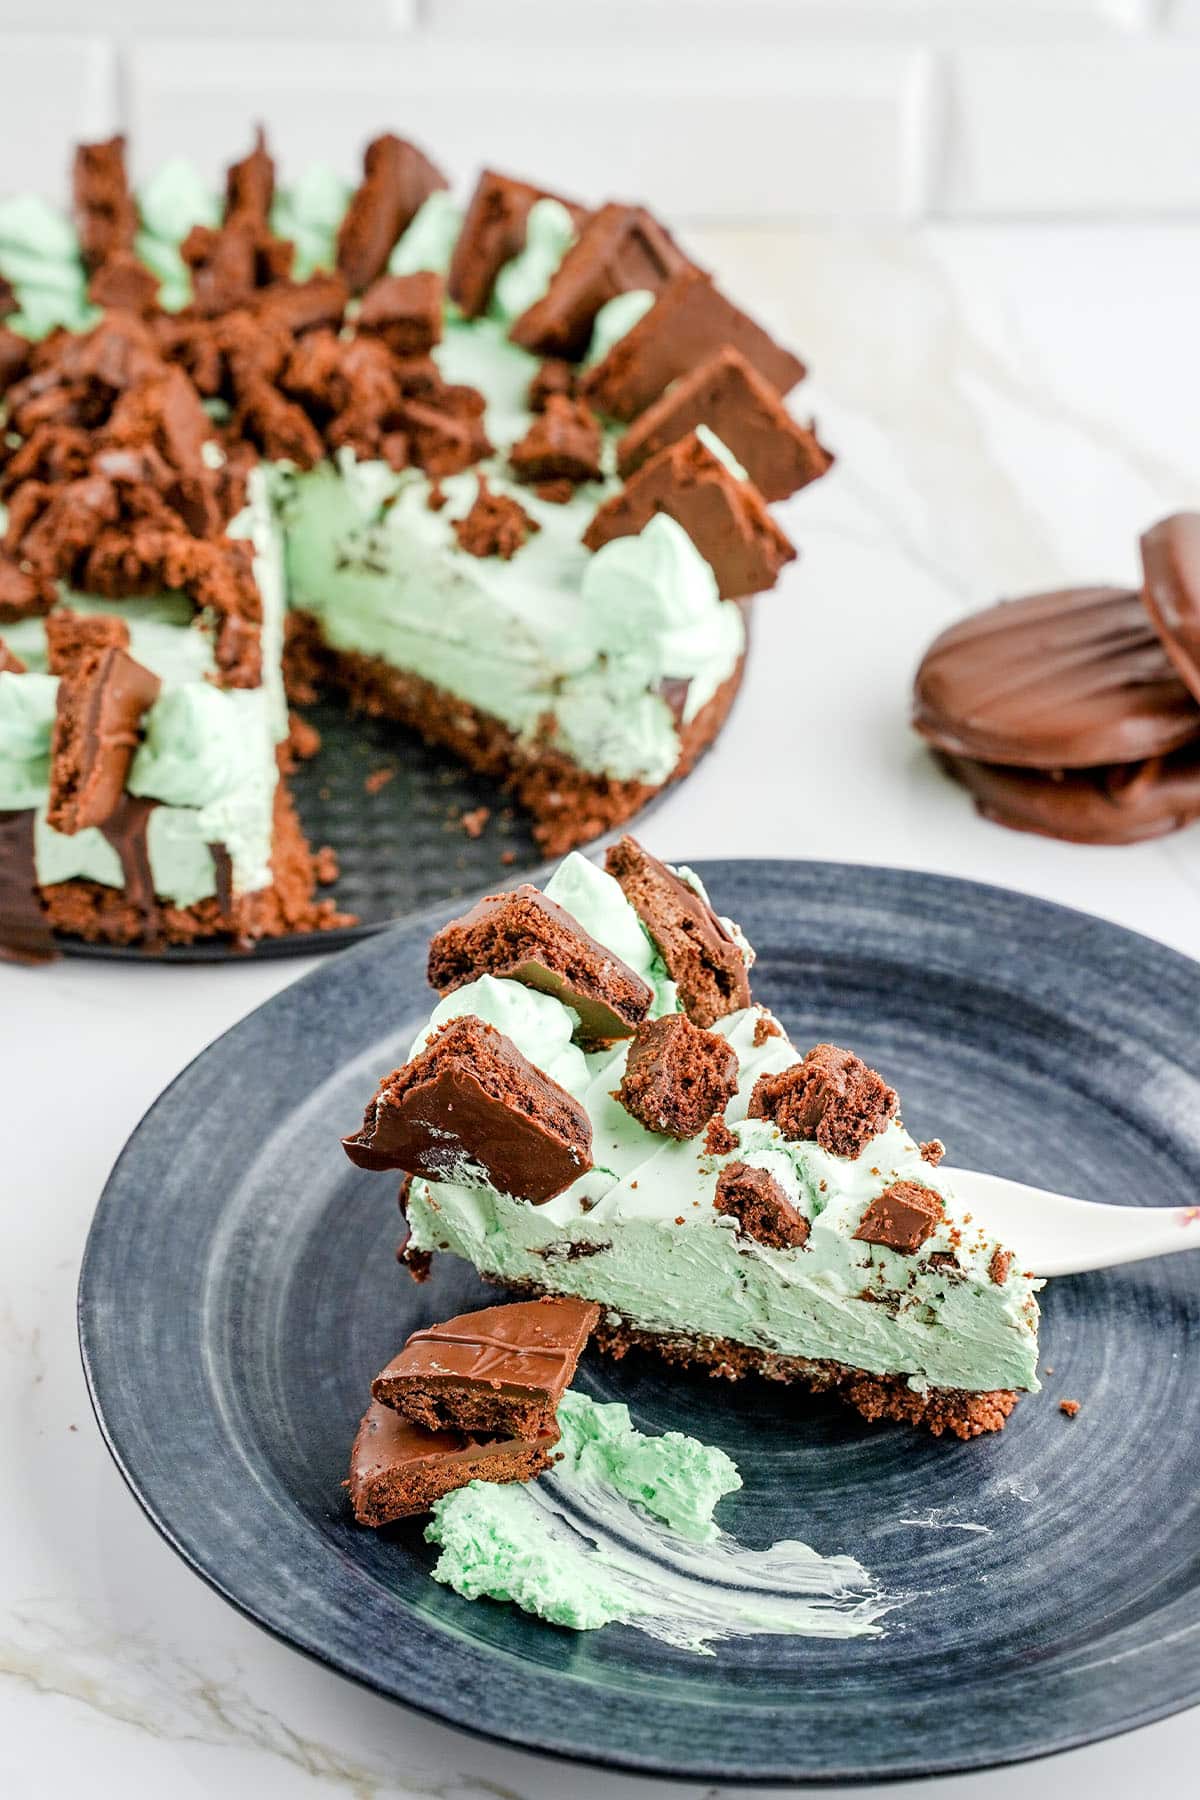 Join us in a slice of heaven with this Thin Mint Cheesecake.